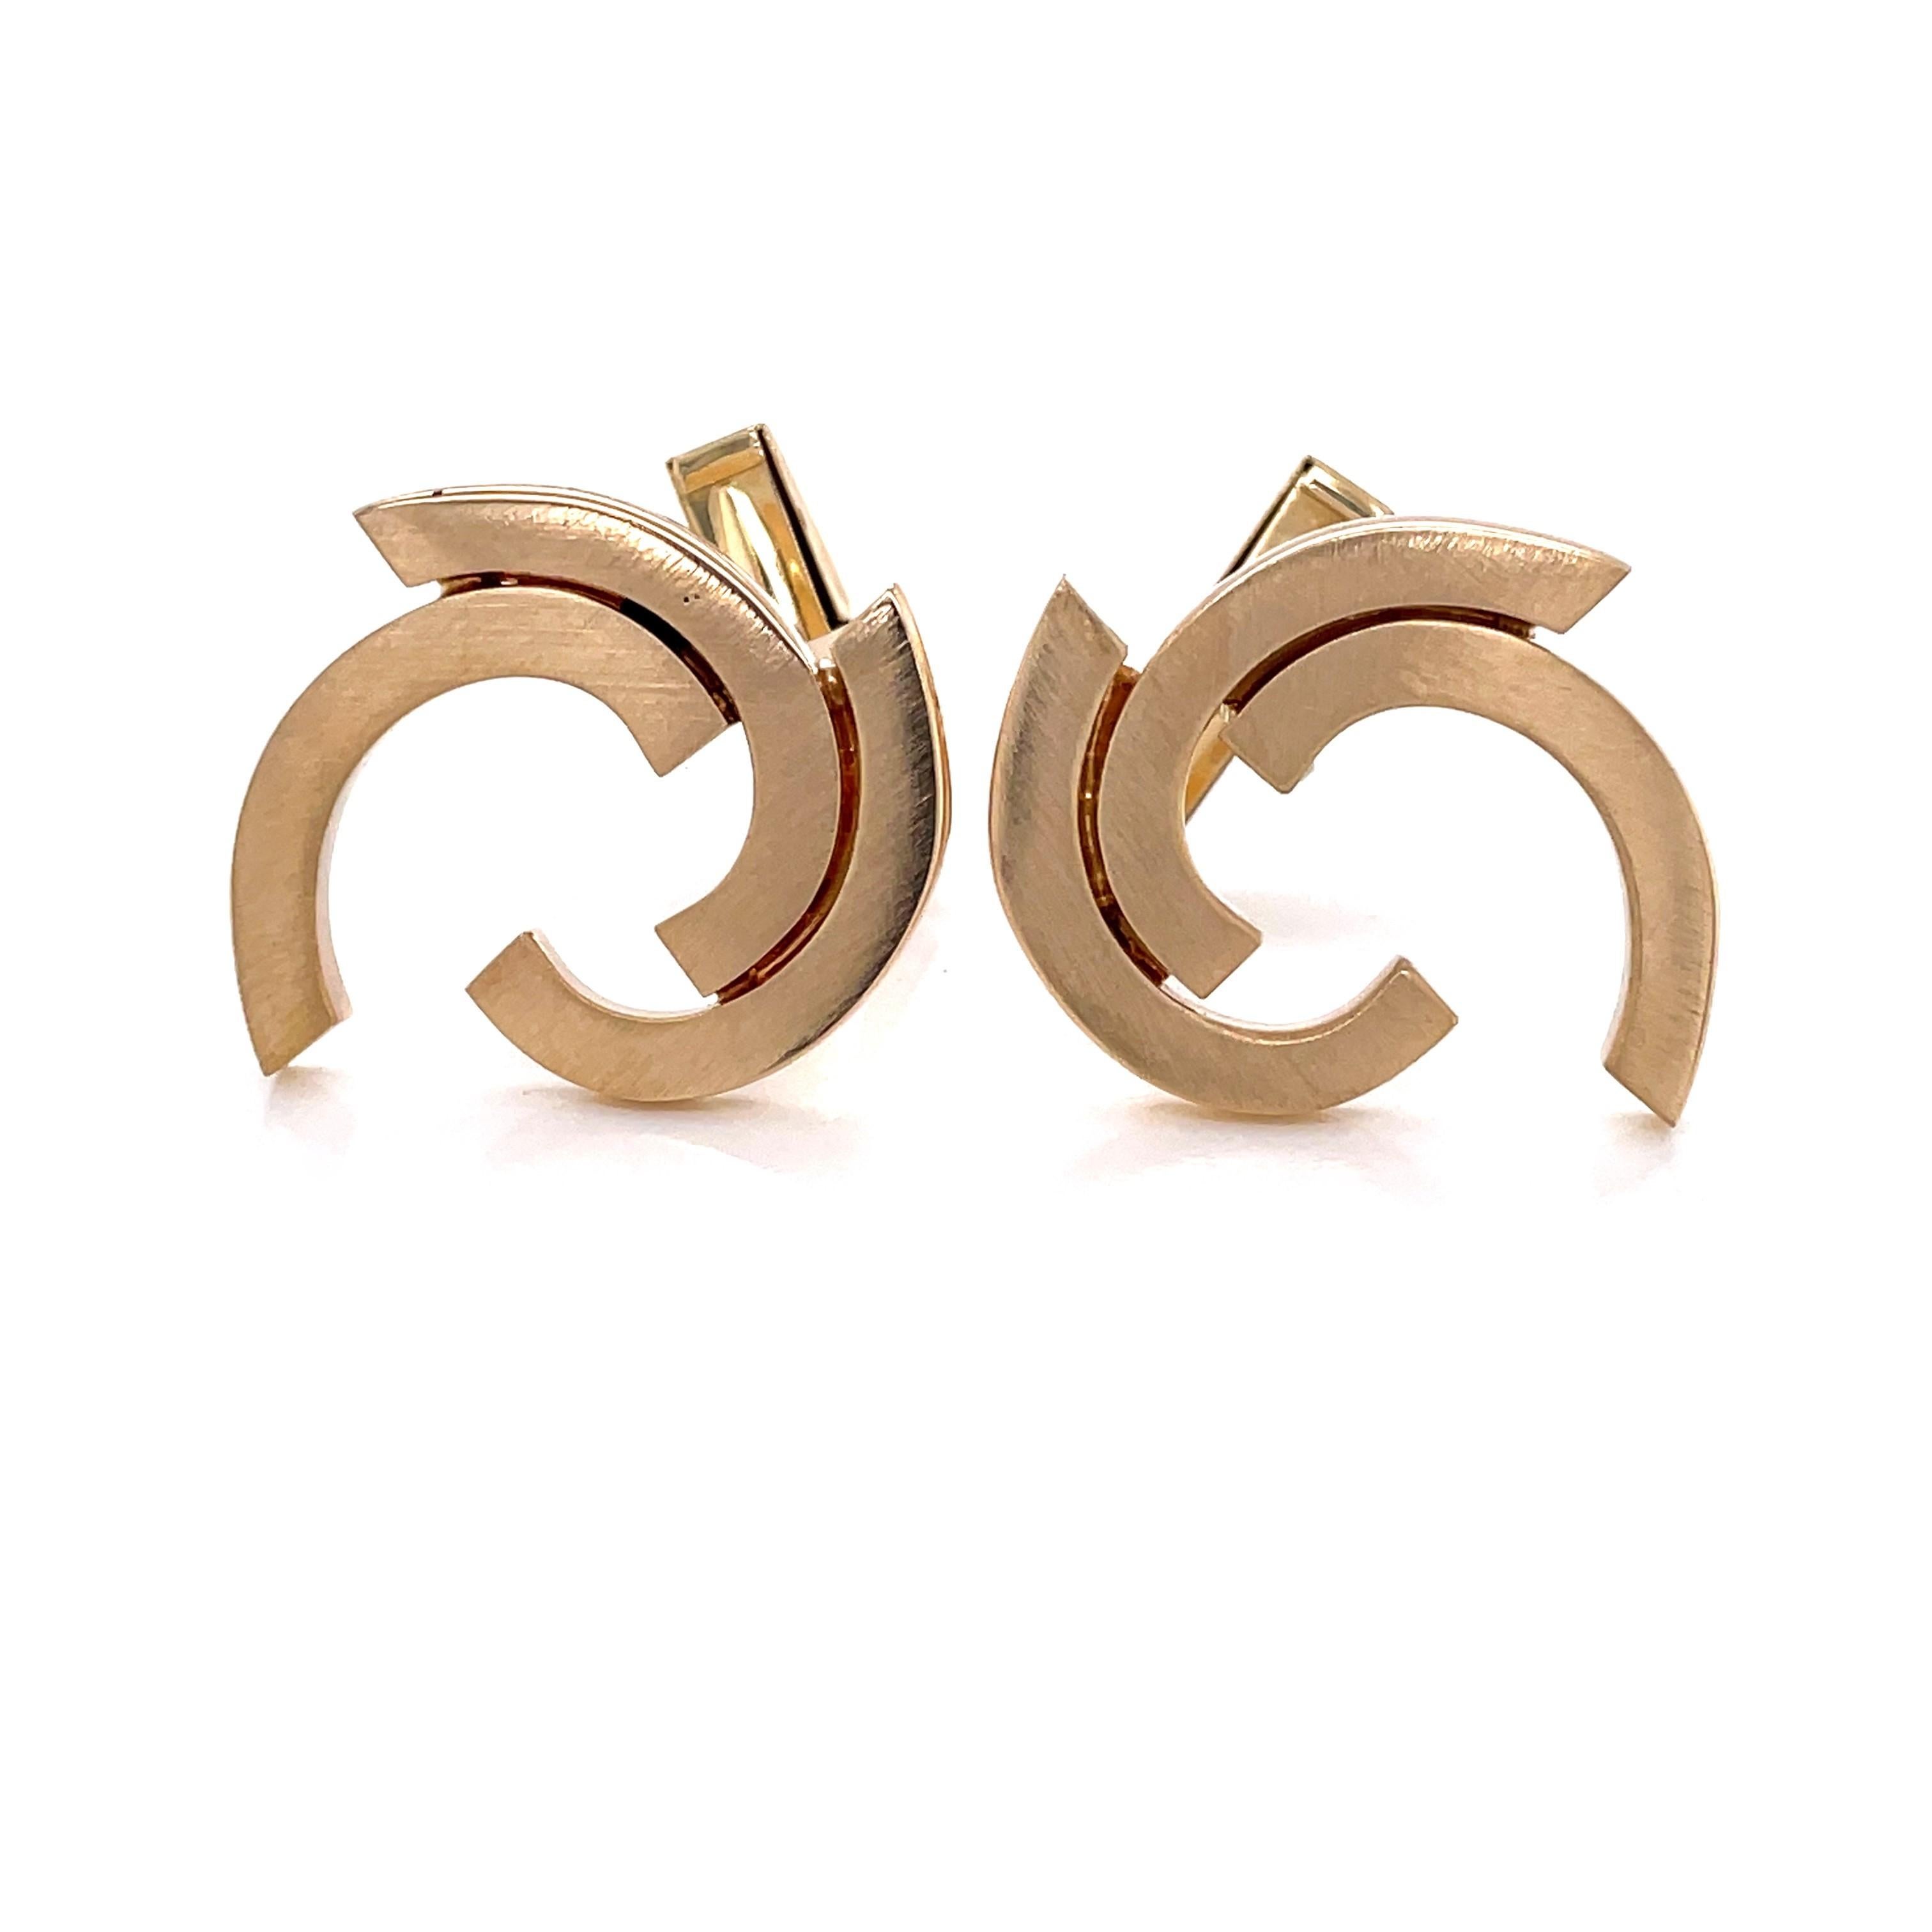 The intriguing modern curves of satin fourteen karat 14k yellow gold create an interesting detail for fine dressing with this cuff link pair. These fine unisex cuff links measure approximately 23.5mm x 20mm and are fitted with whale back toggles.